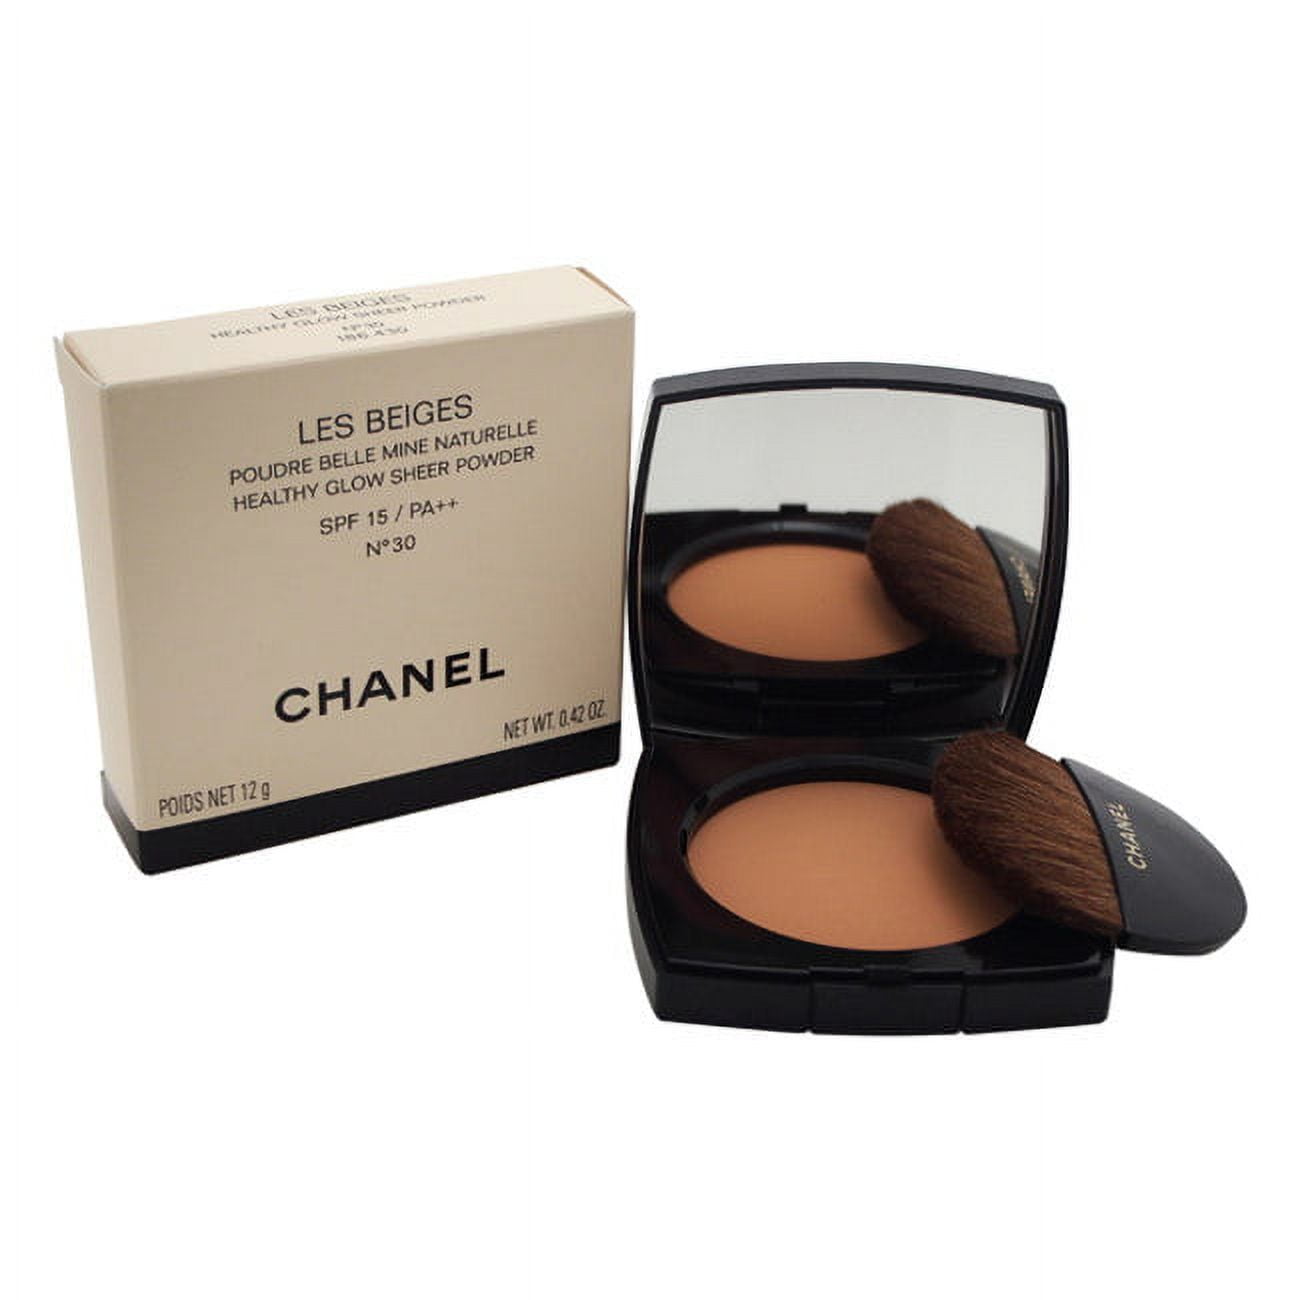 Chanel Les Beiges Healthy Glow Sheer Colour SPF 15 No. 30 0.5